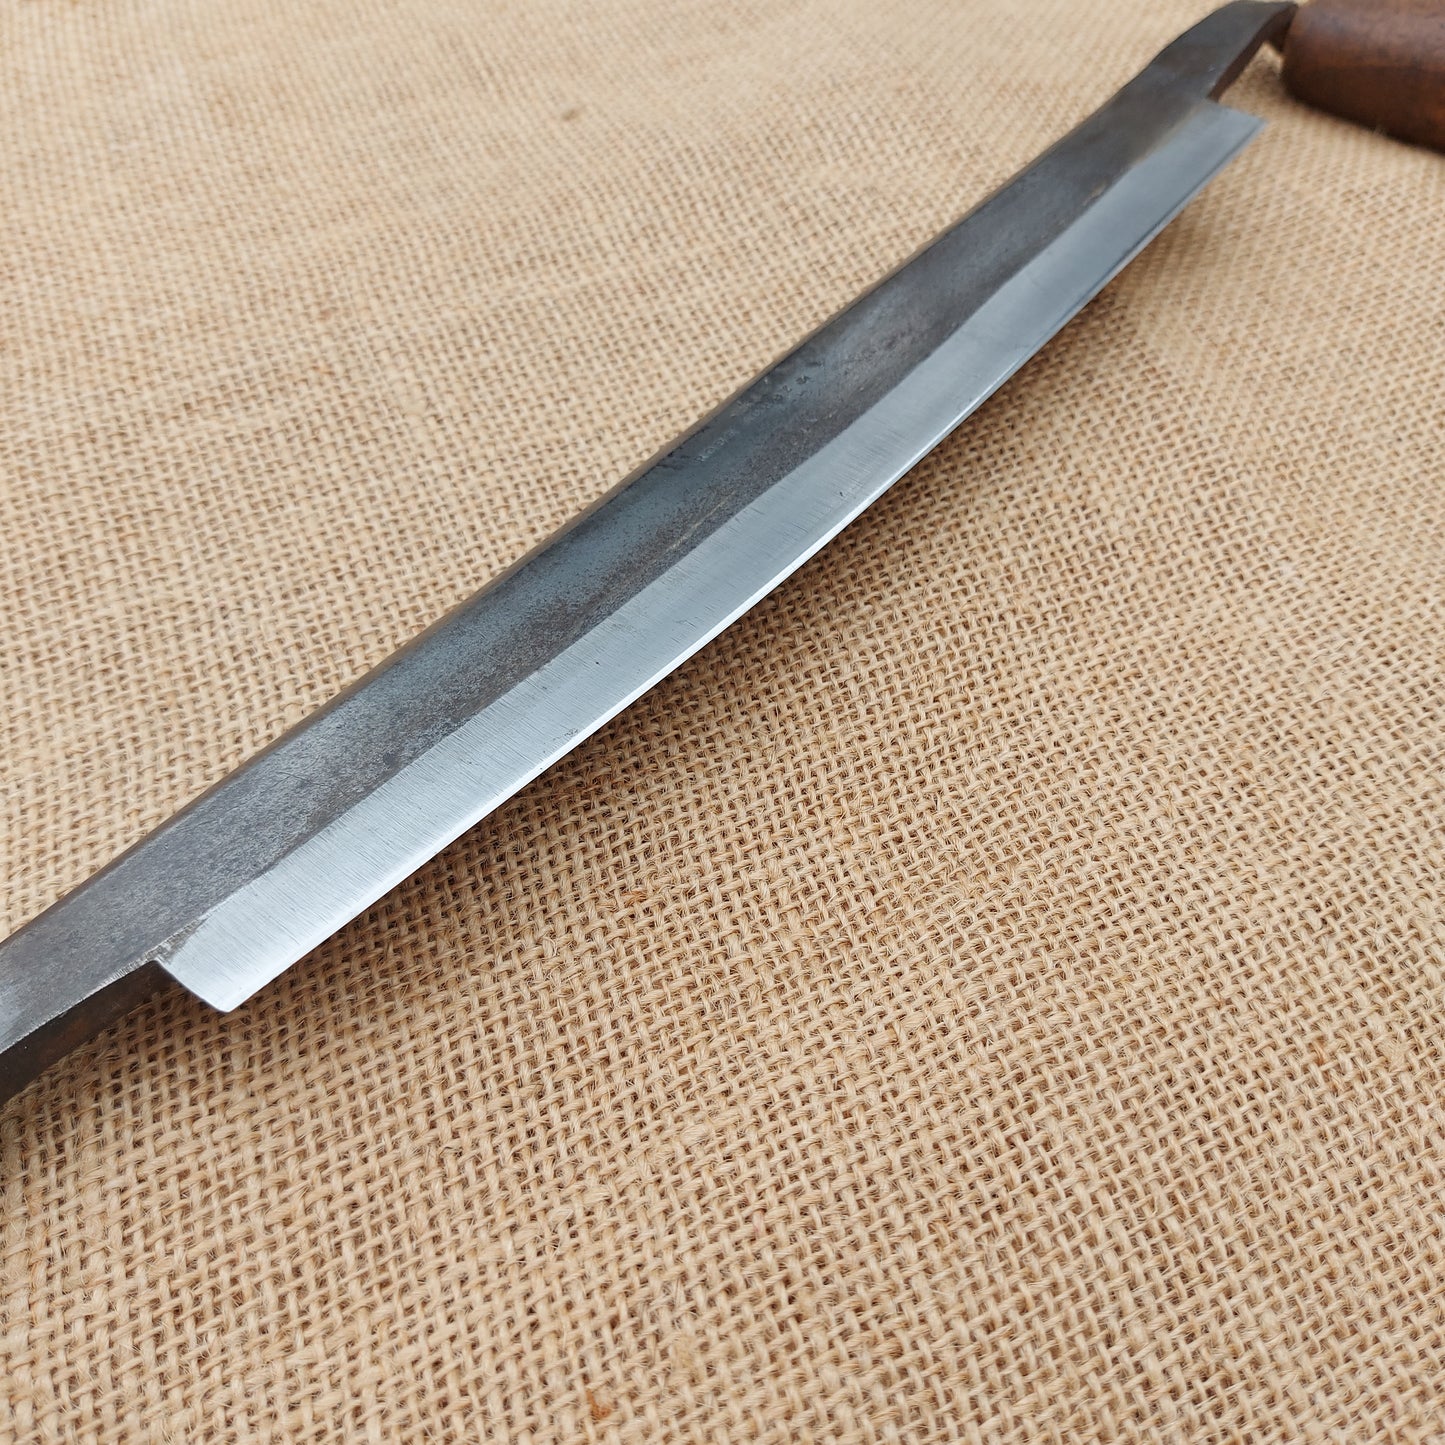 Vintage Drawknife by Robert Sorby